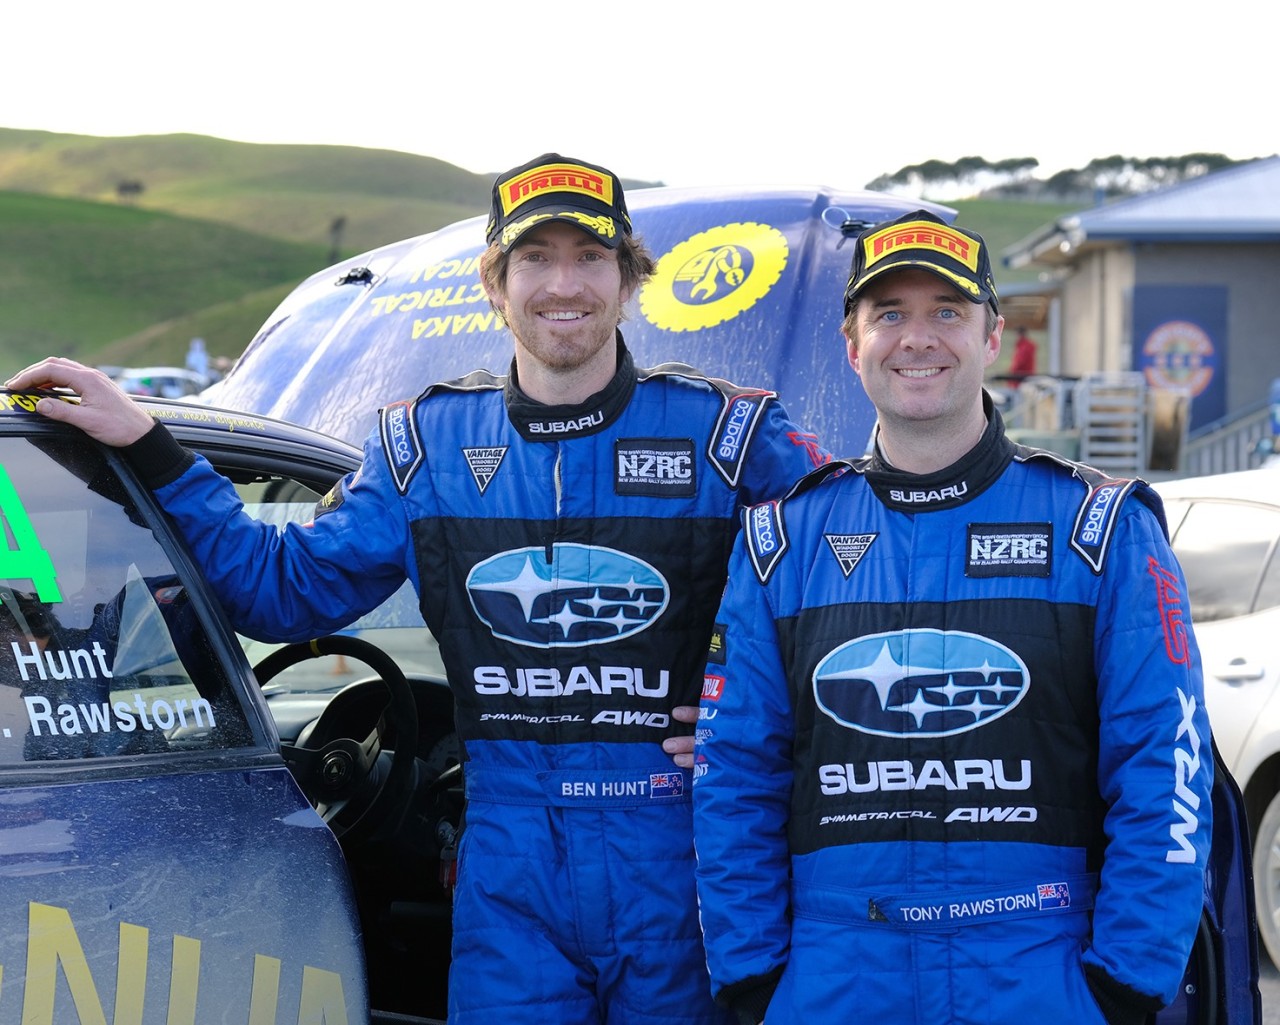 Ben Hunt and co-driver Tony Rawstorn will be teaming up again this weekend in the Subaru WRX STI. Photo: Geoff Ridder.